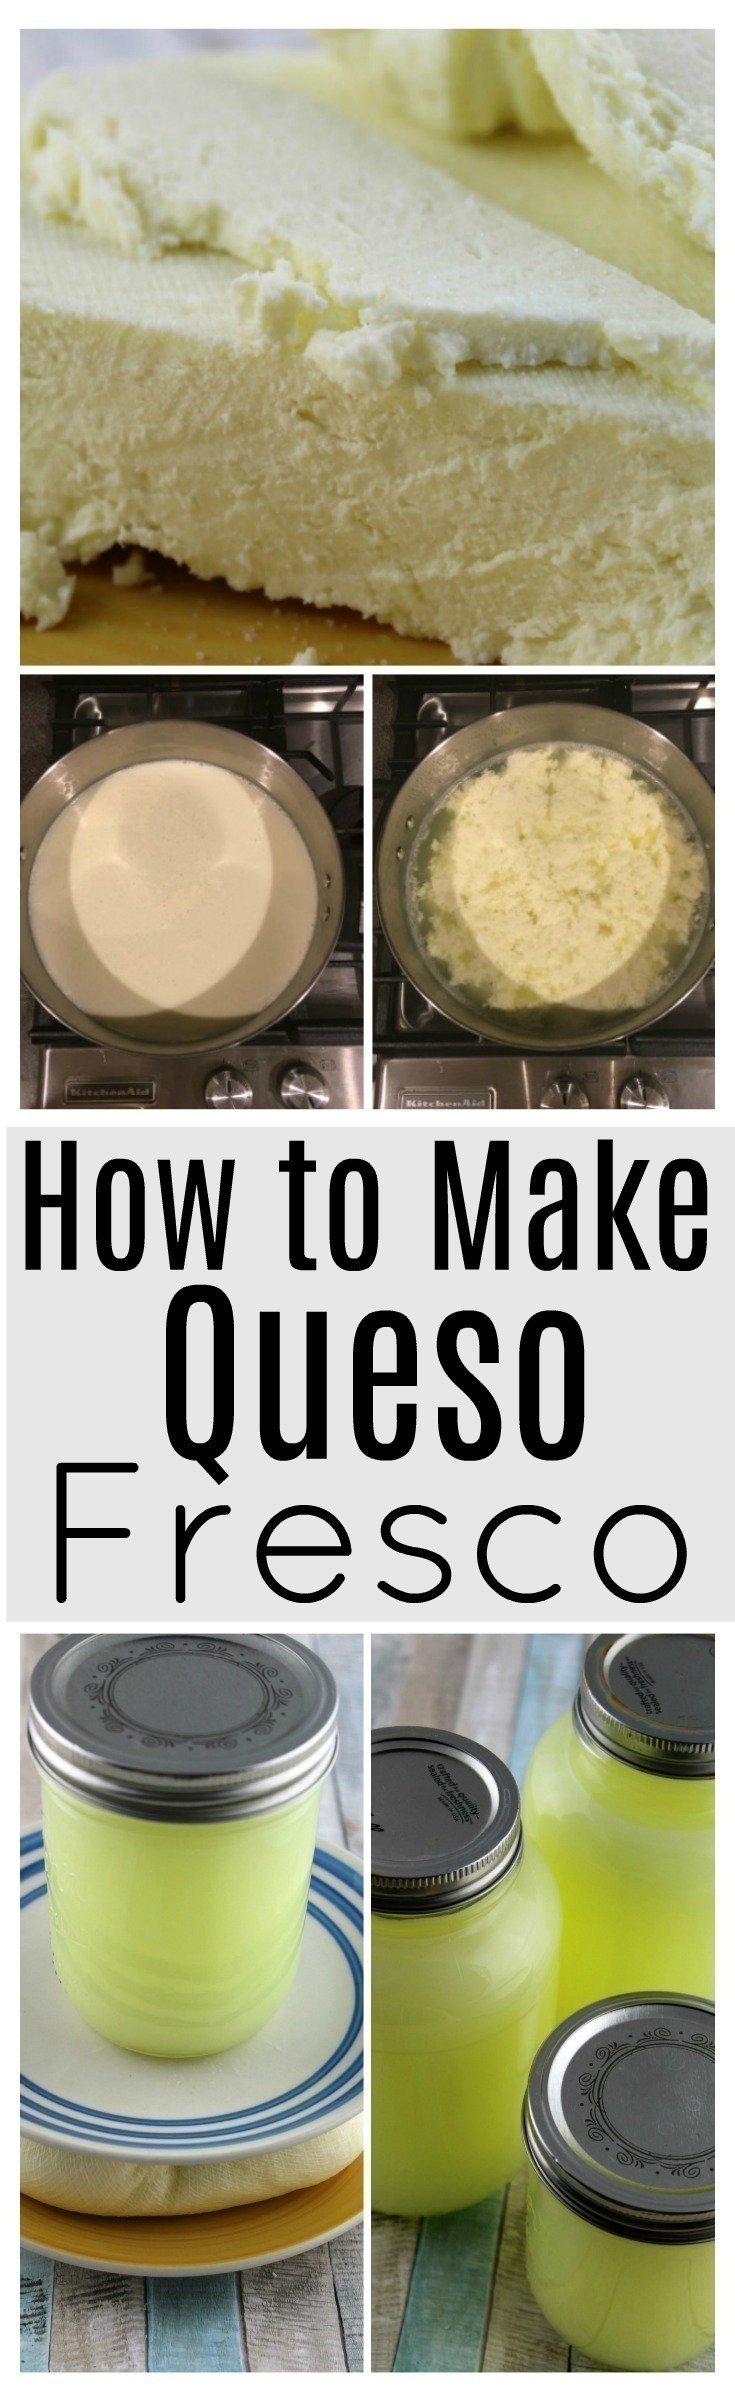 Making your own Mexican Queso Fresco (fresh cheese) is easier than you think! It's delicious and creamy and so easy to make at home.